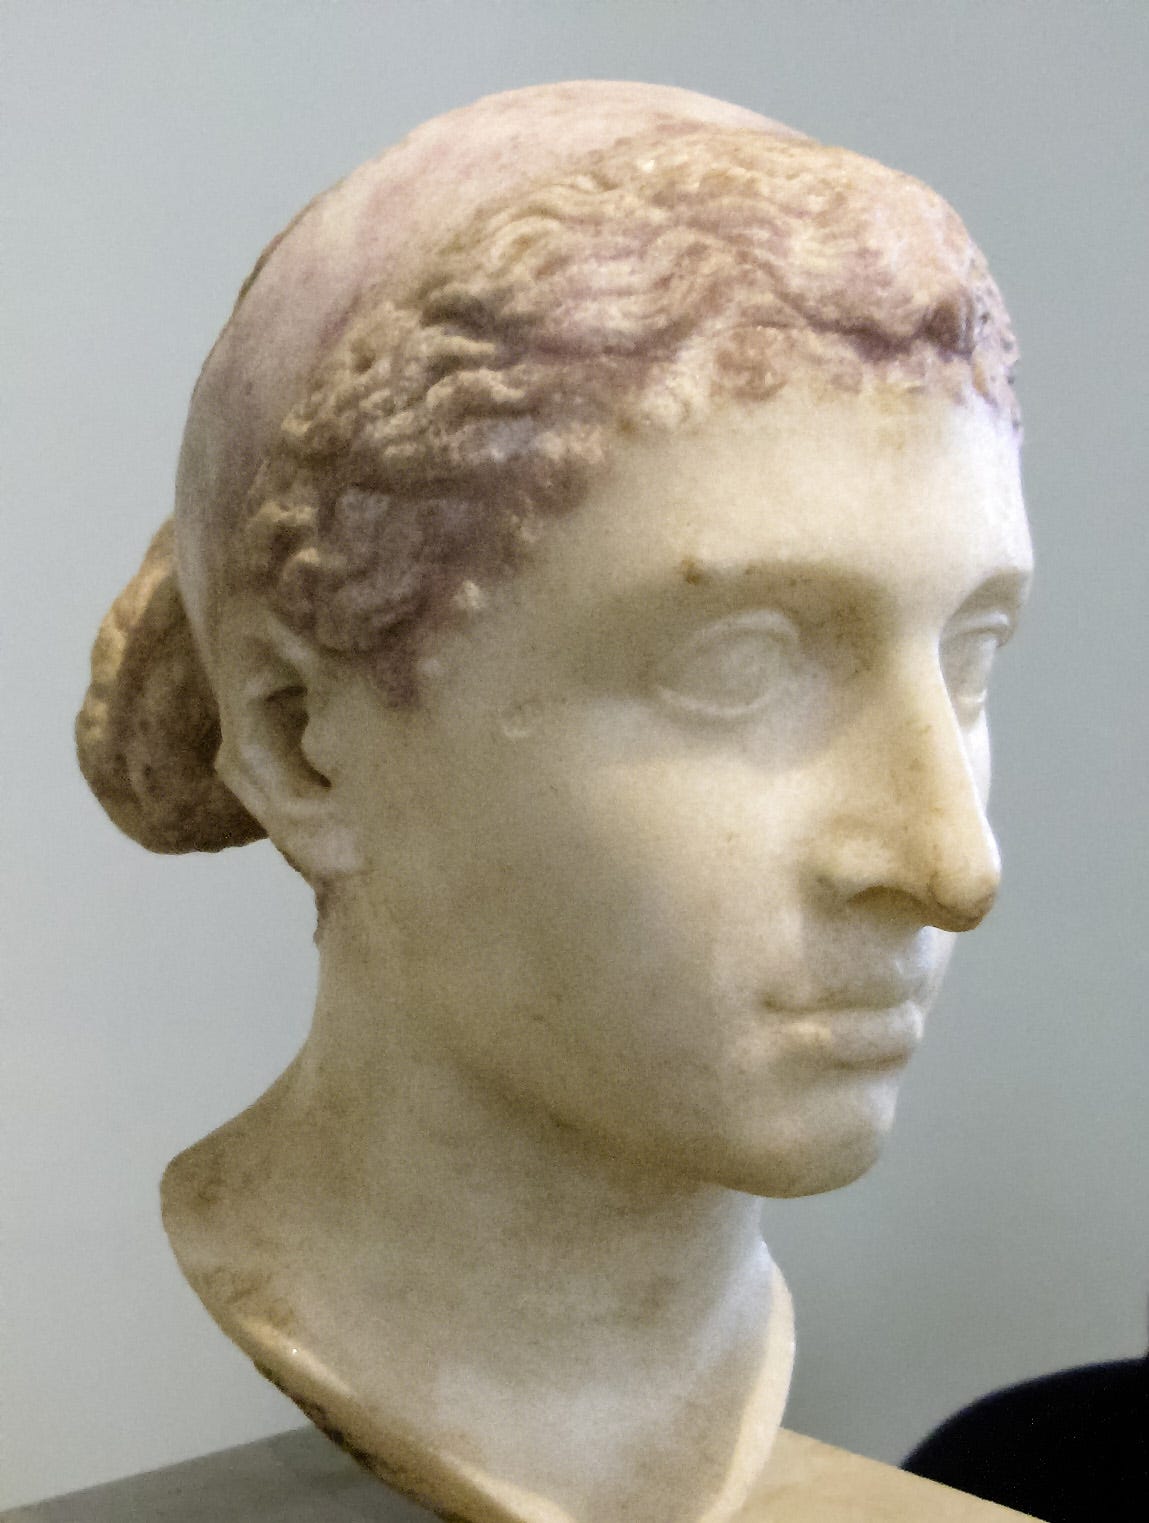 10 Badass Women Of Antiquity These Women Weren T Content To Be The… By Dr Thomas J West Iii